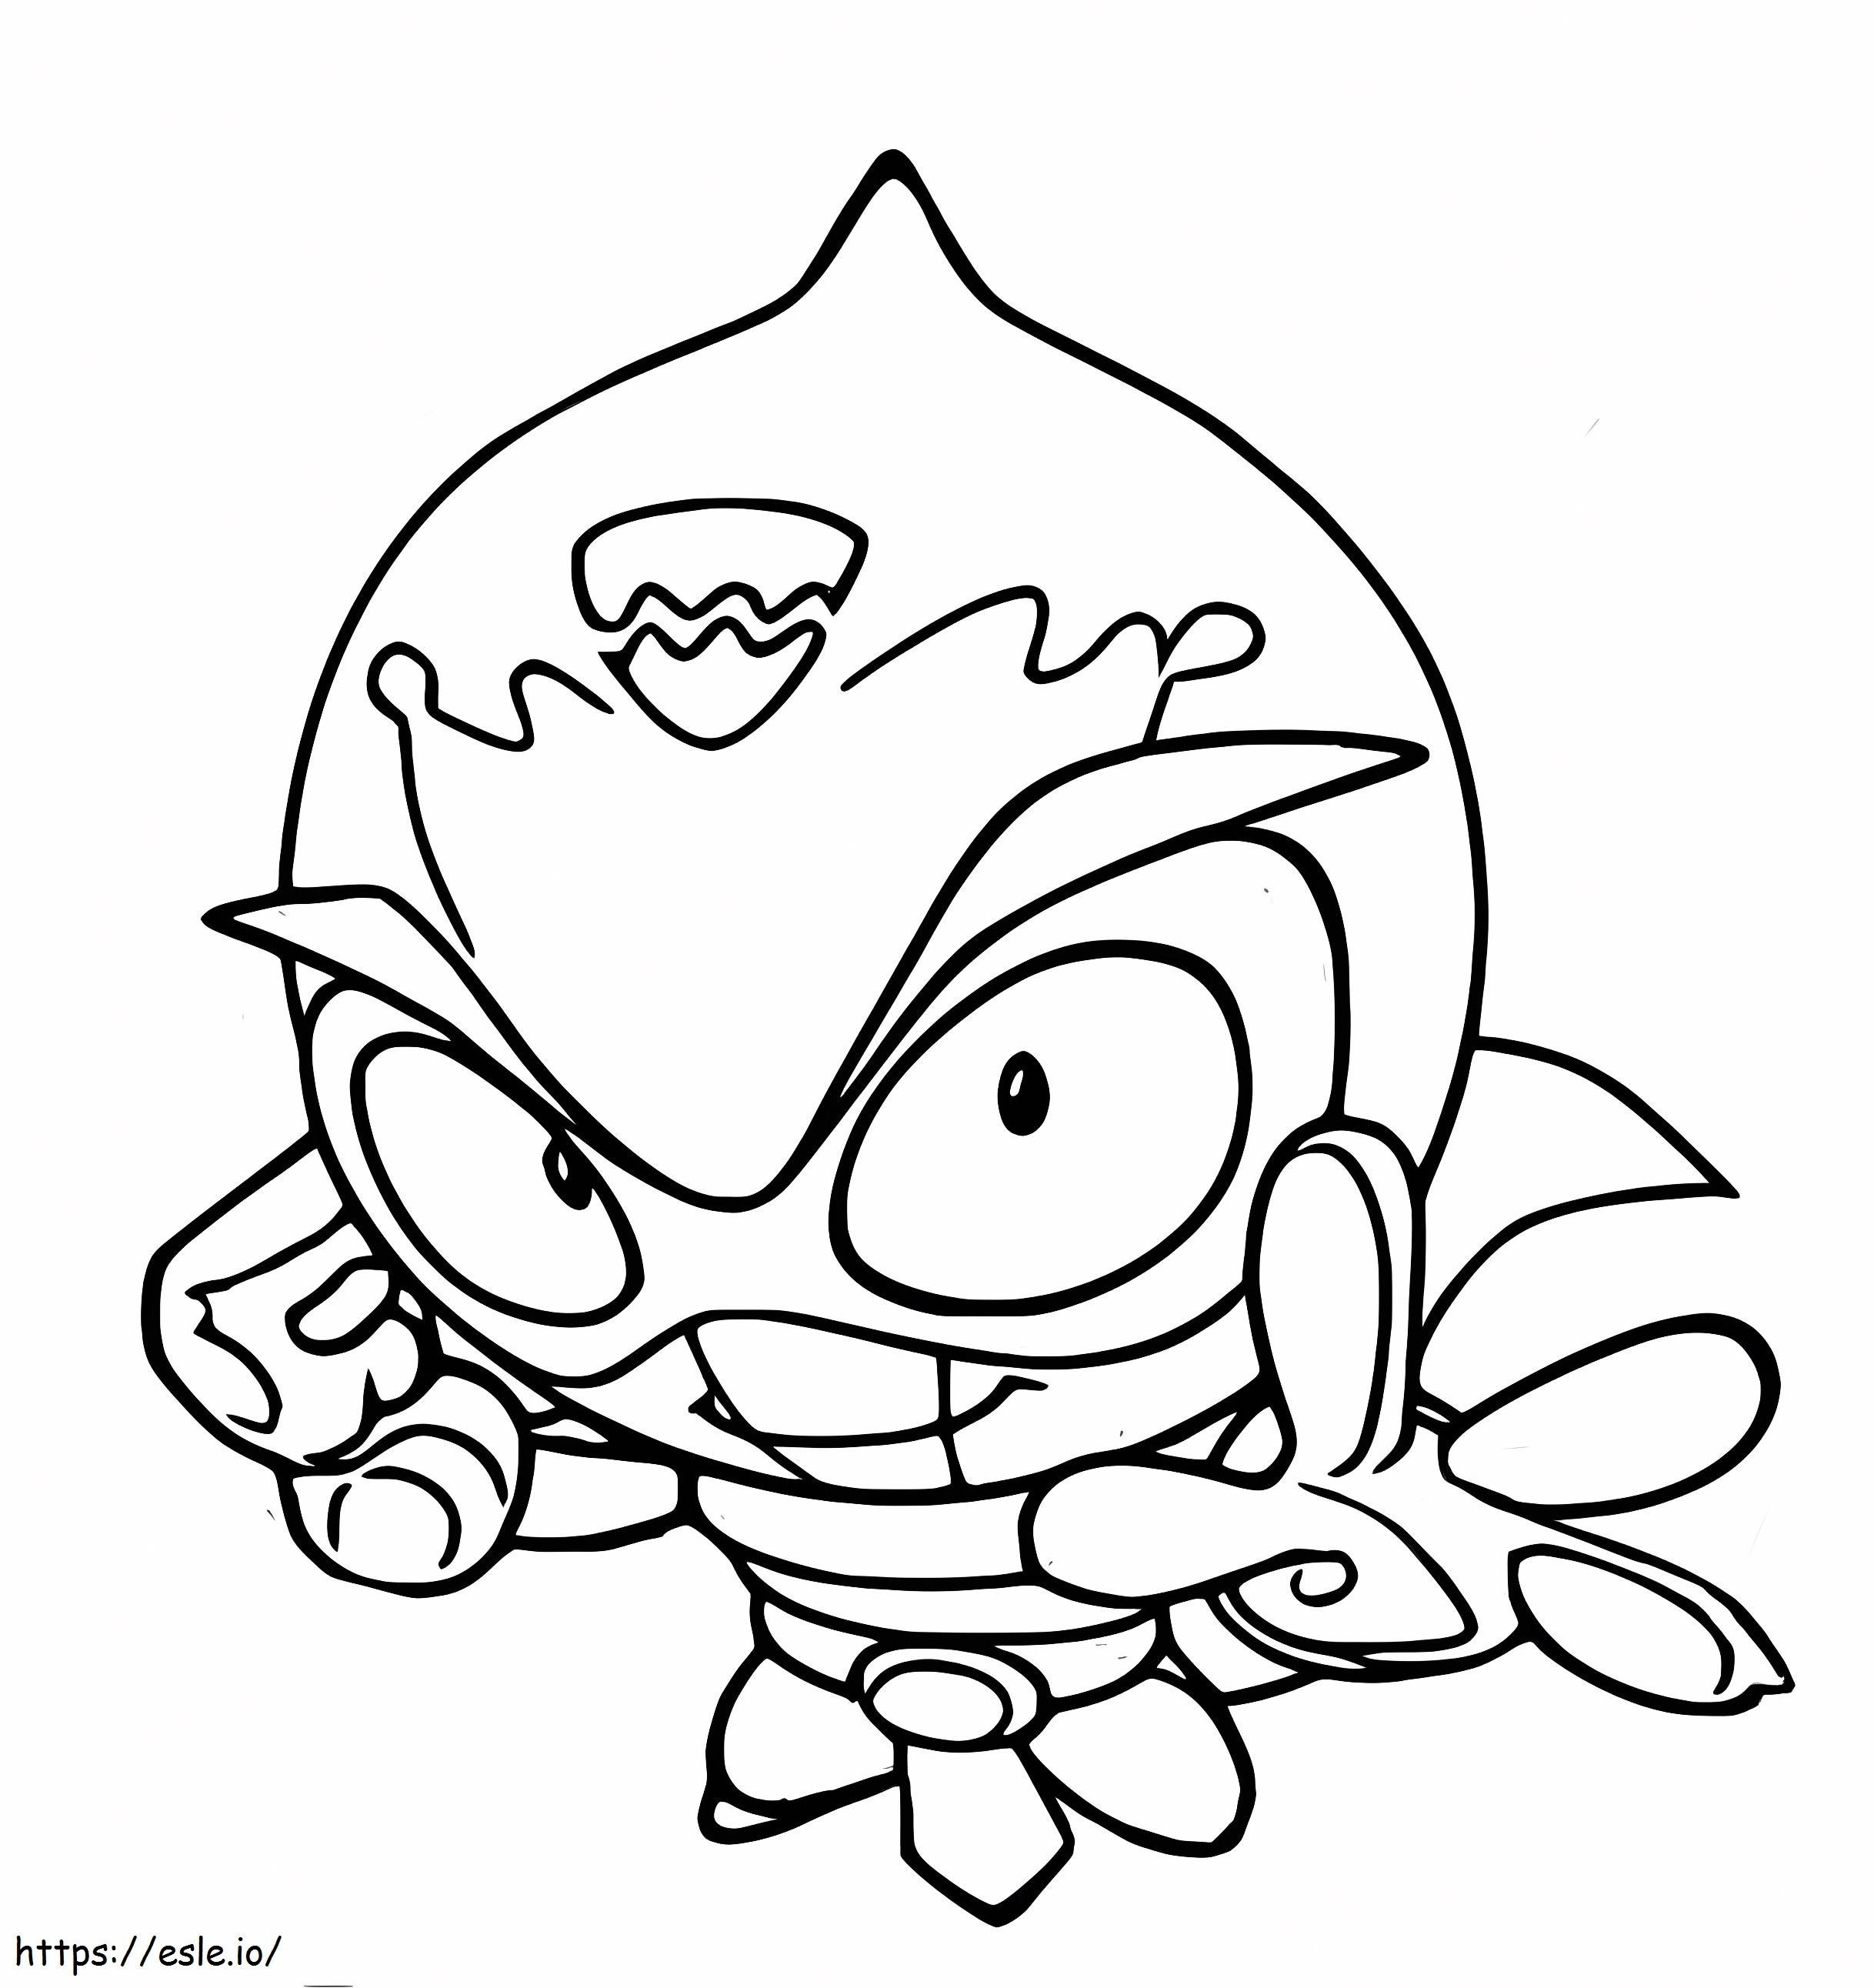 Sparky Superzings coloring page